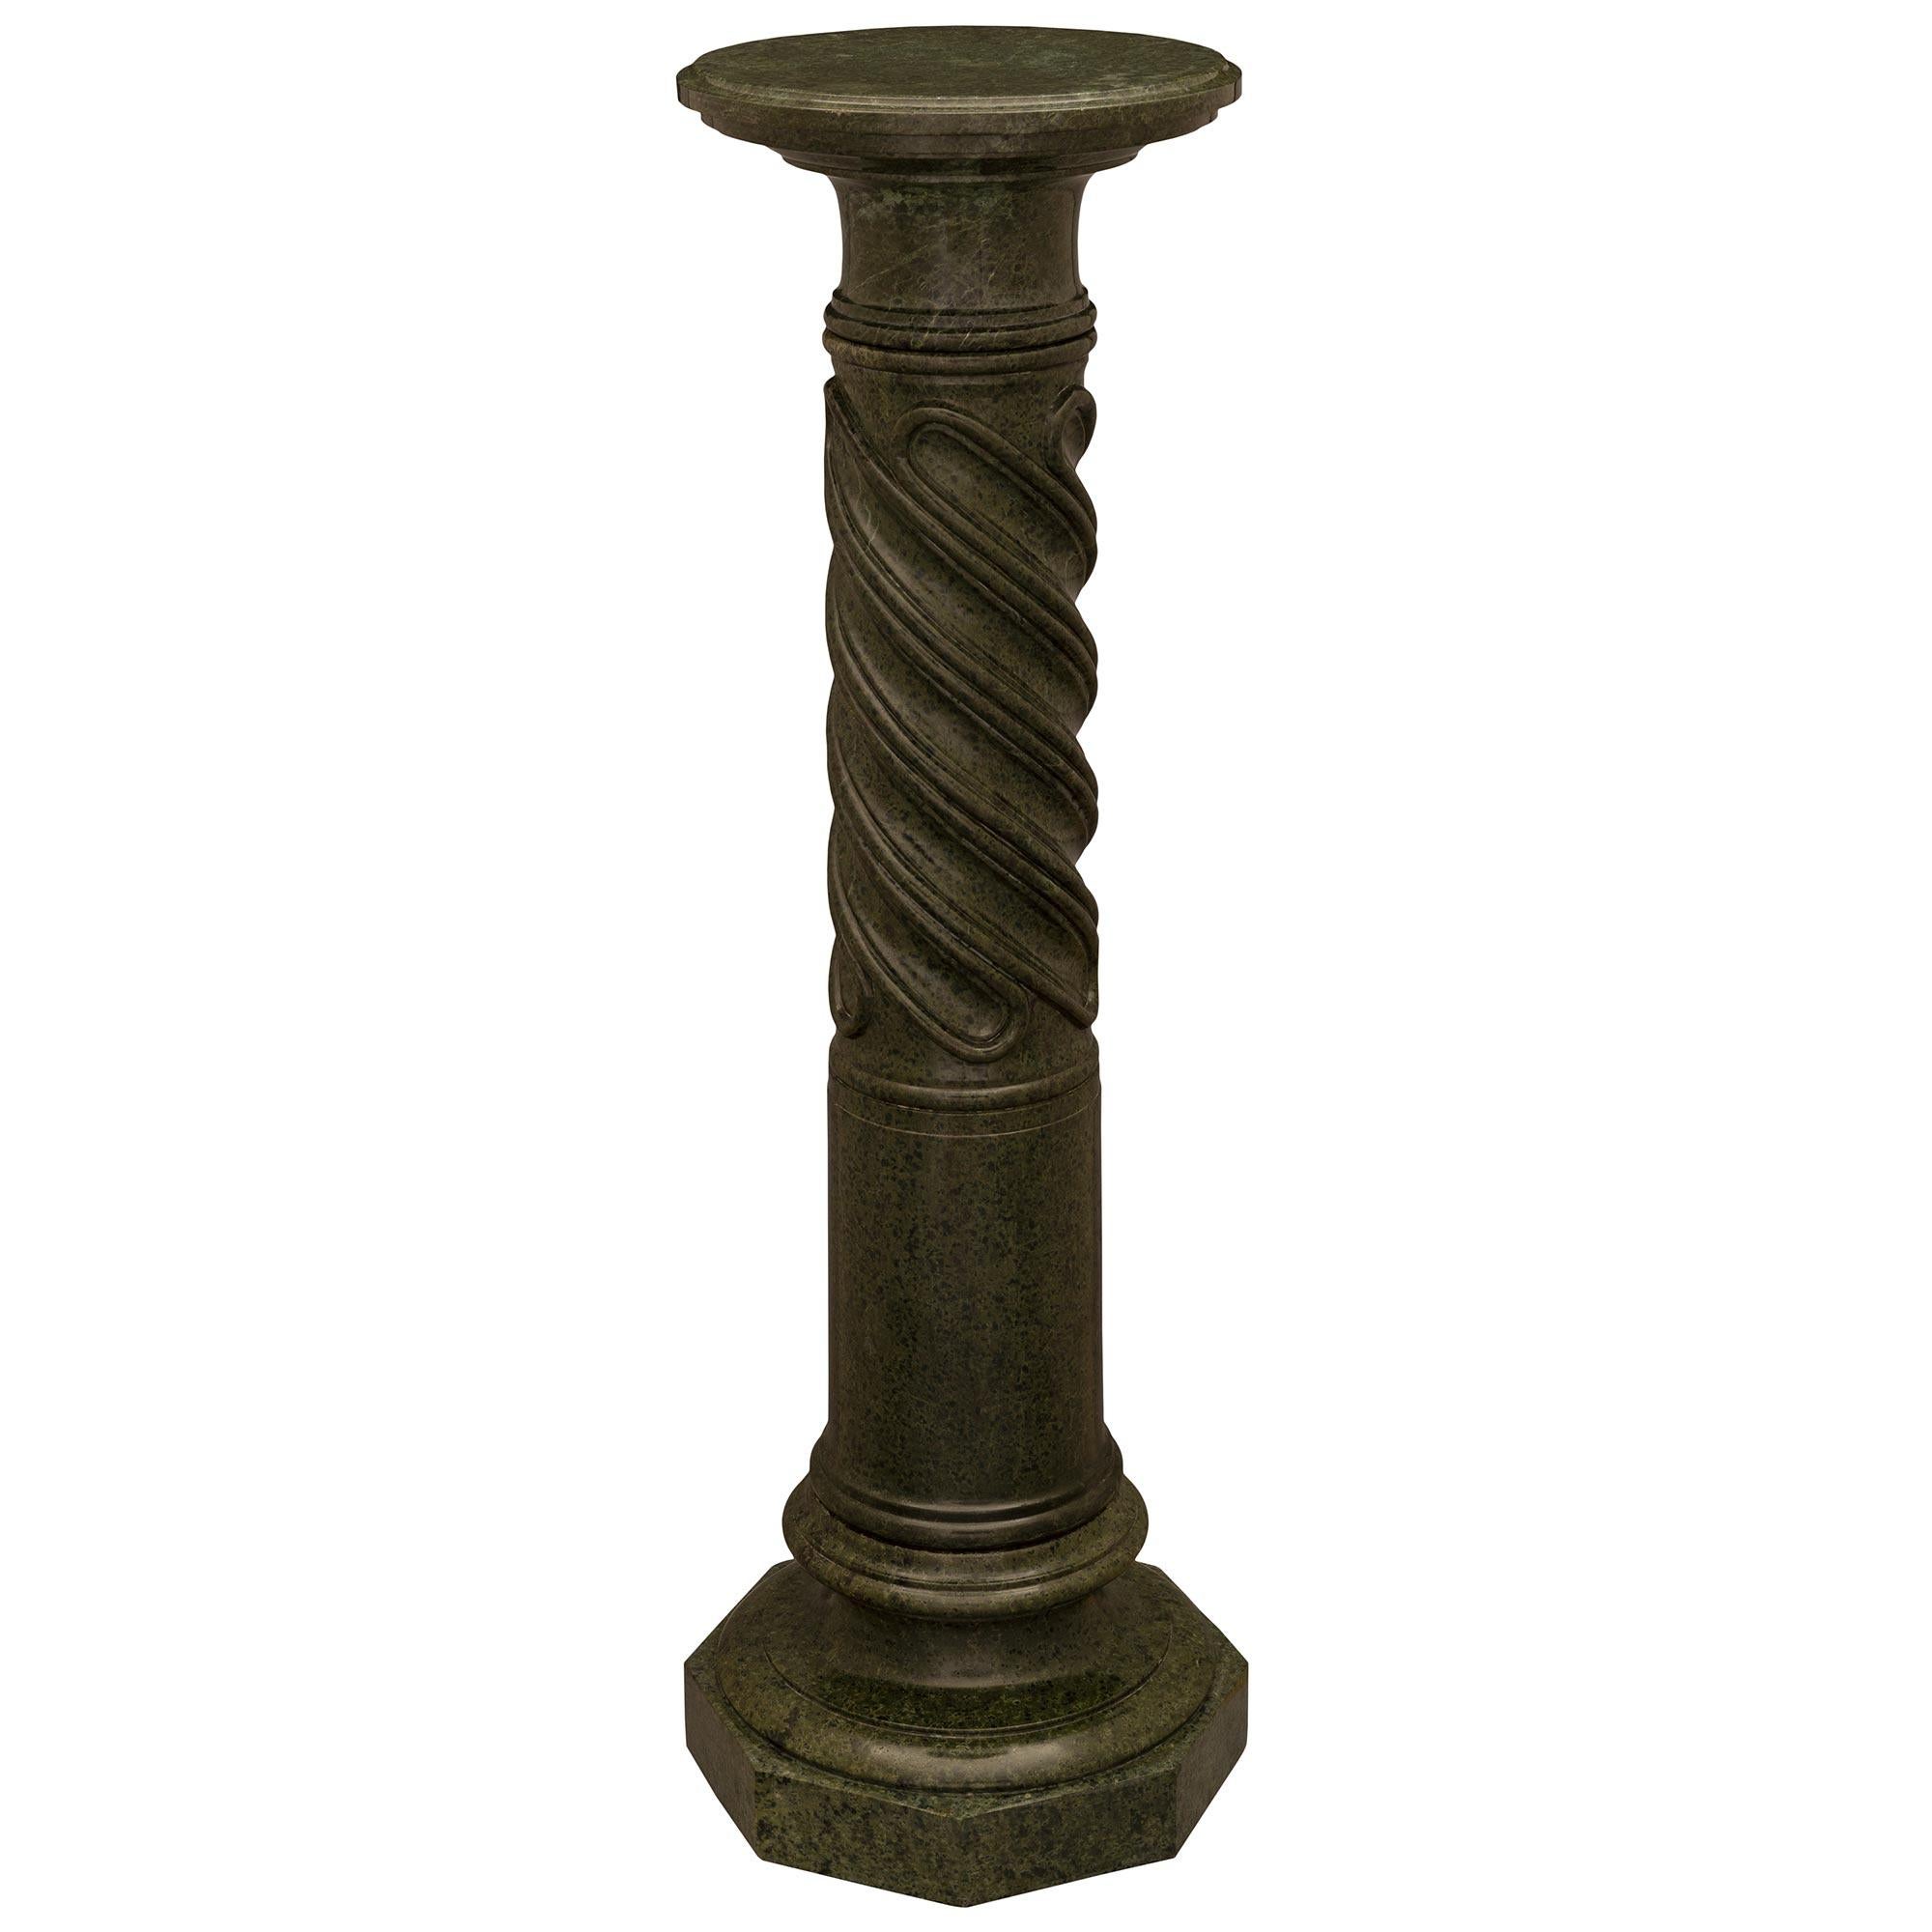 French 19th Century Vert De Patricia Marble Pedestal Column In Good Condition For Sale In West Palm Beach, FL